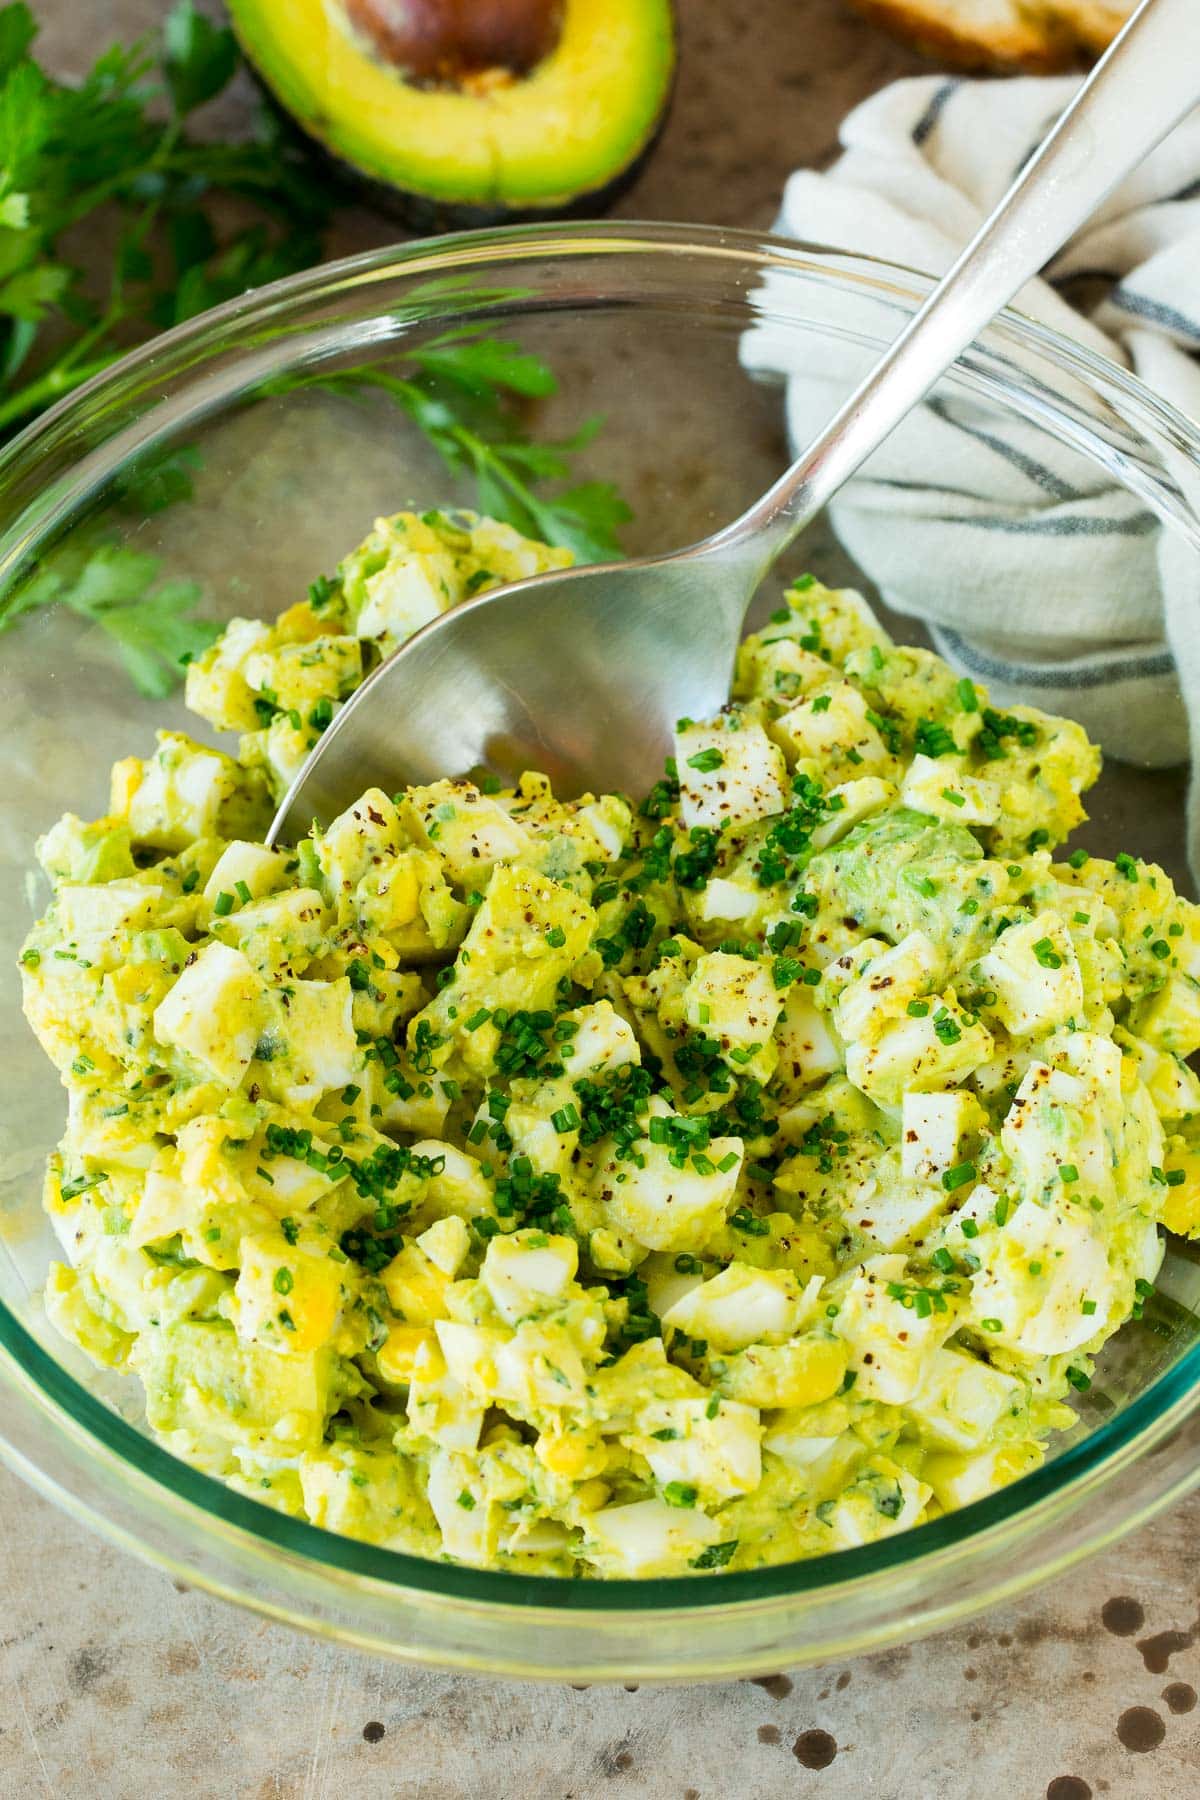 A serving spoon in a bowl of avocado egg salad.